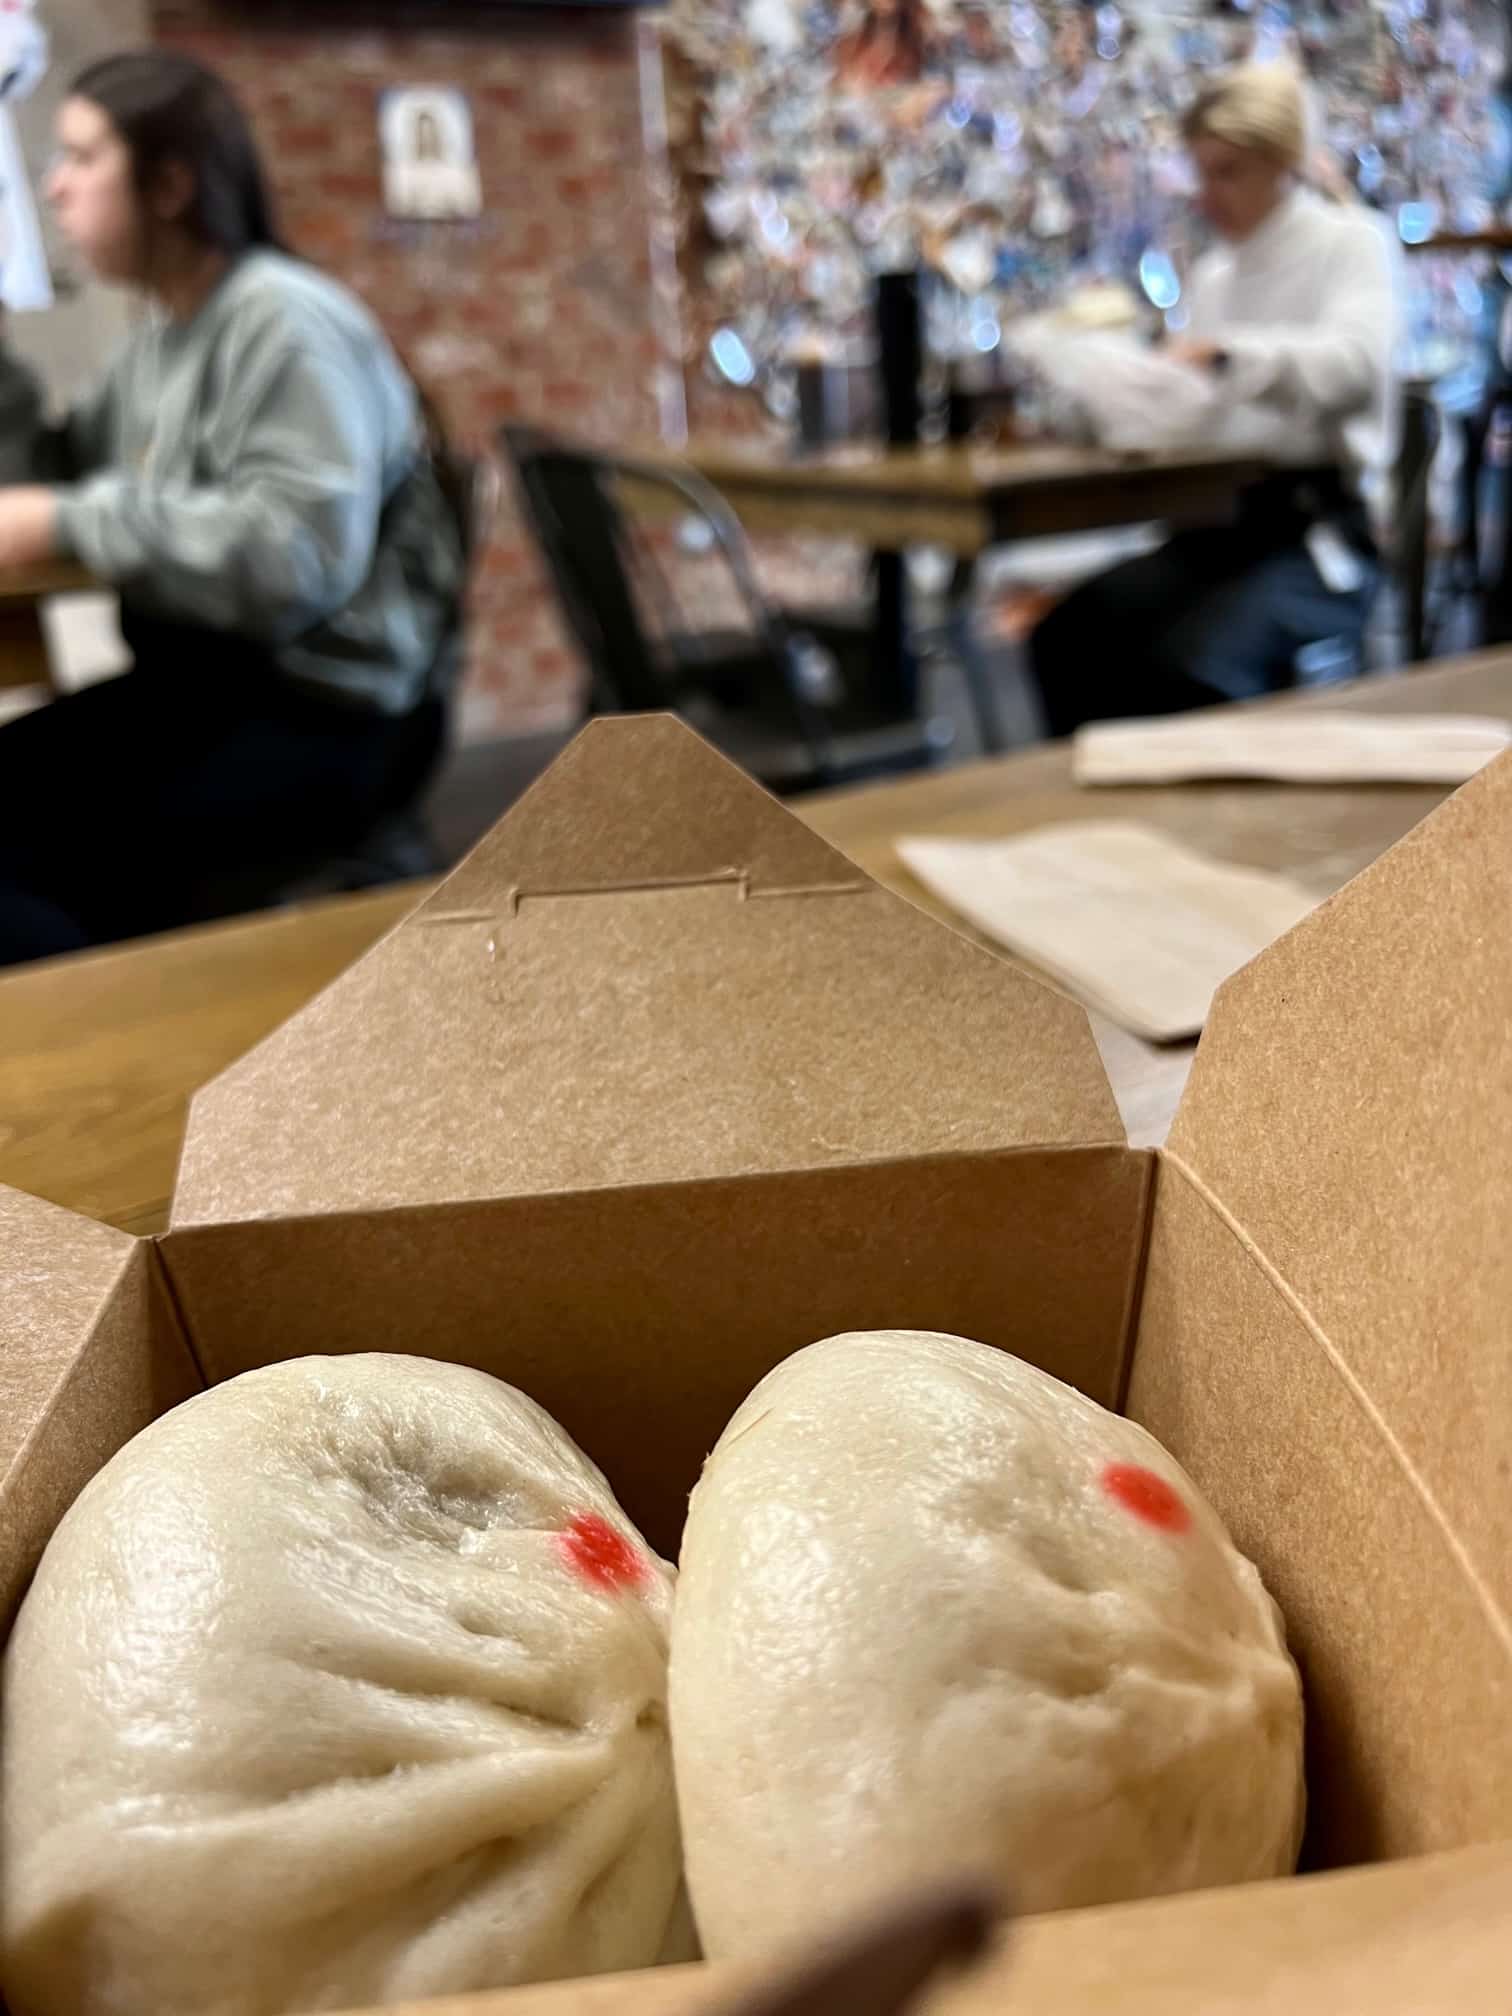 Best things to do in Auburn Alabama - Connie Pearson - Dumplings at The Irritable Bao